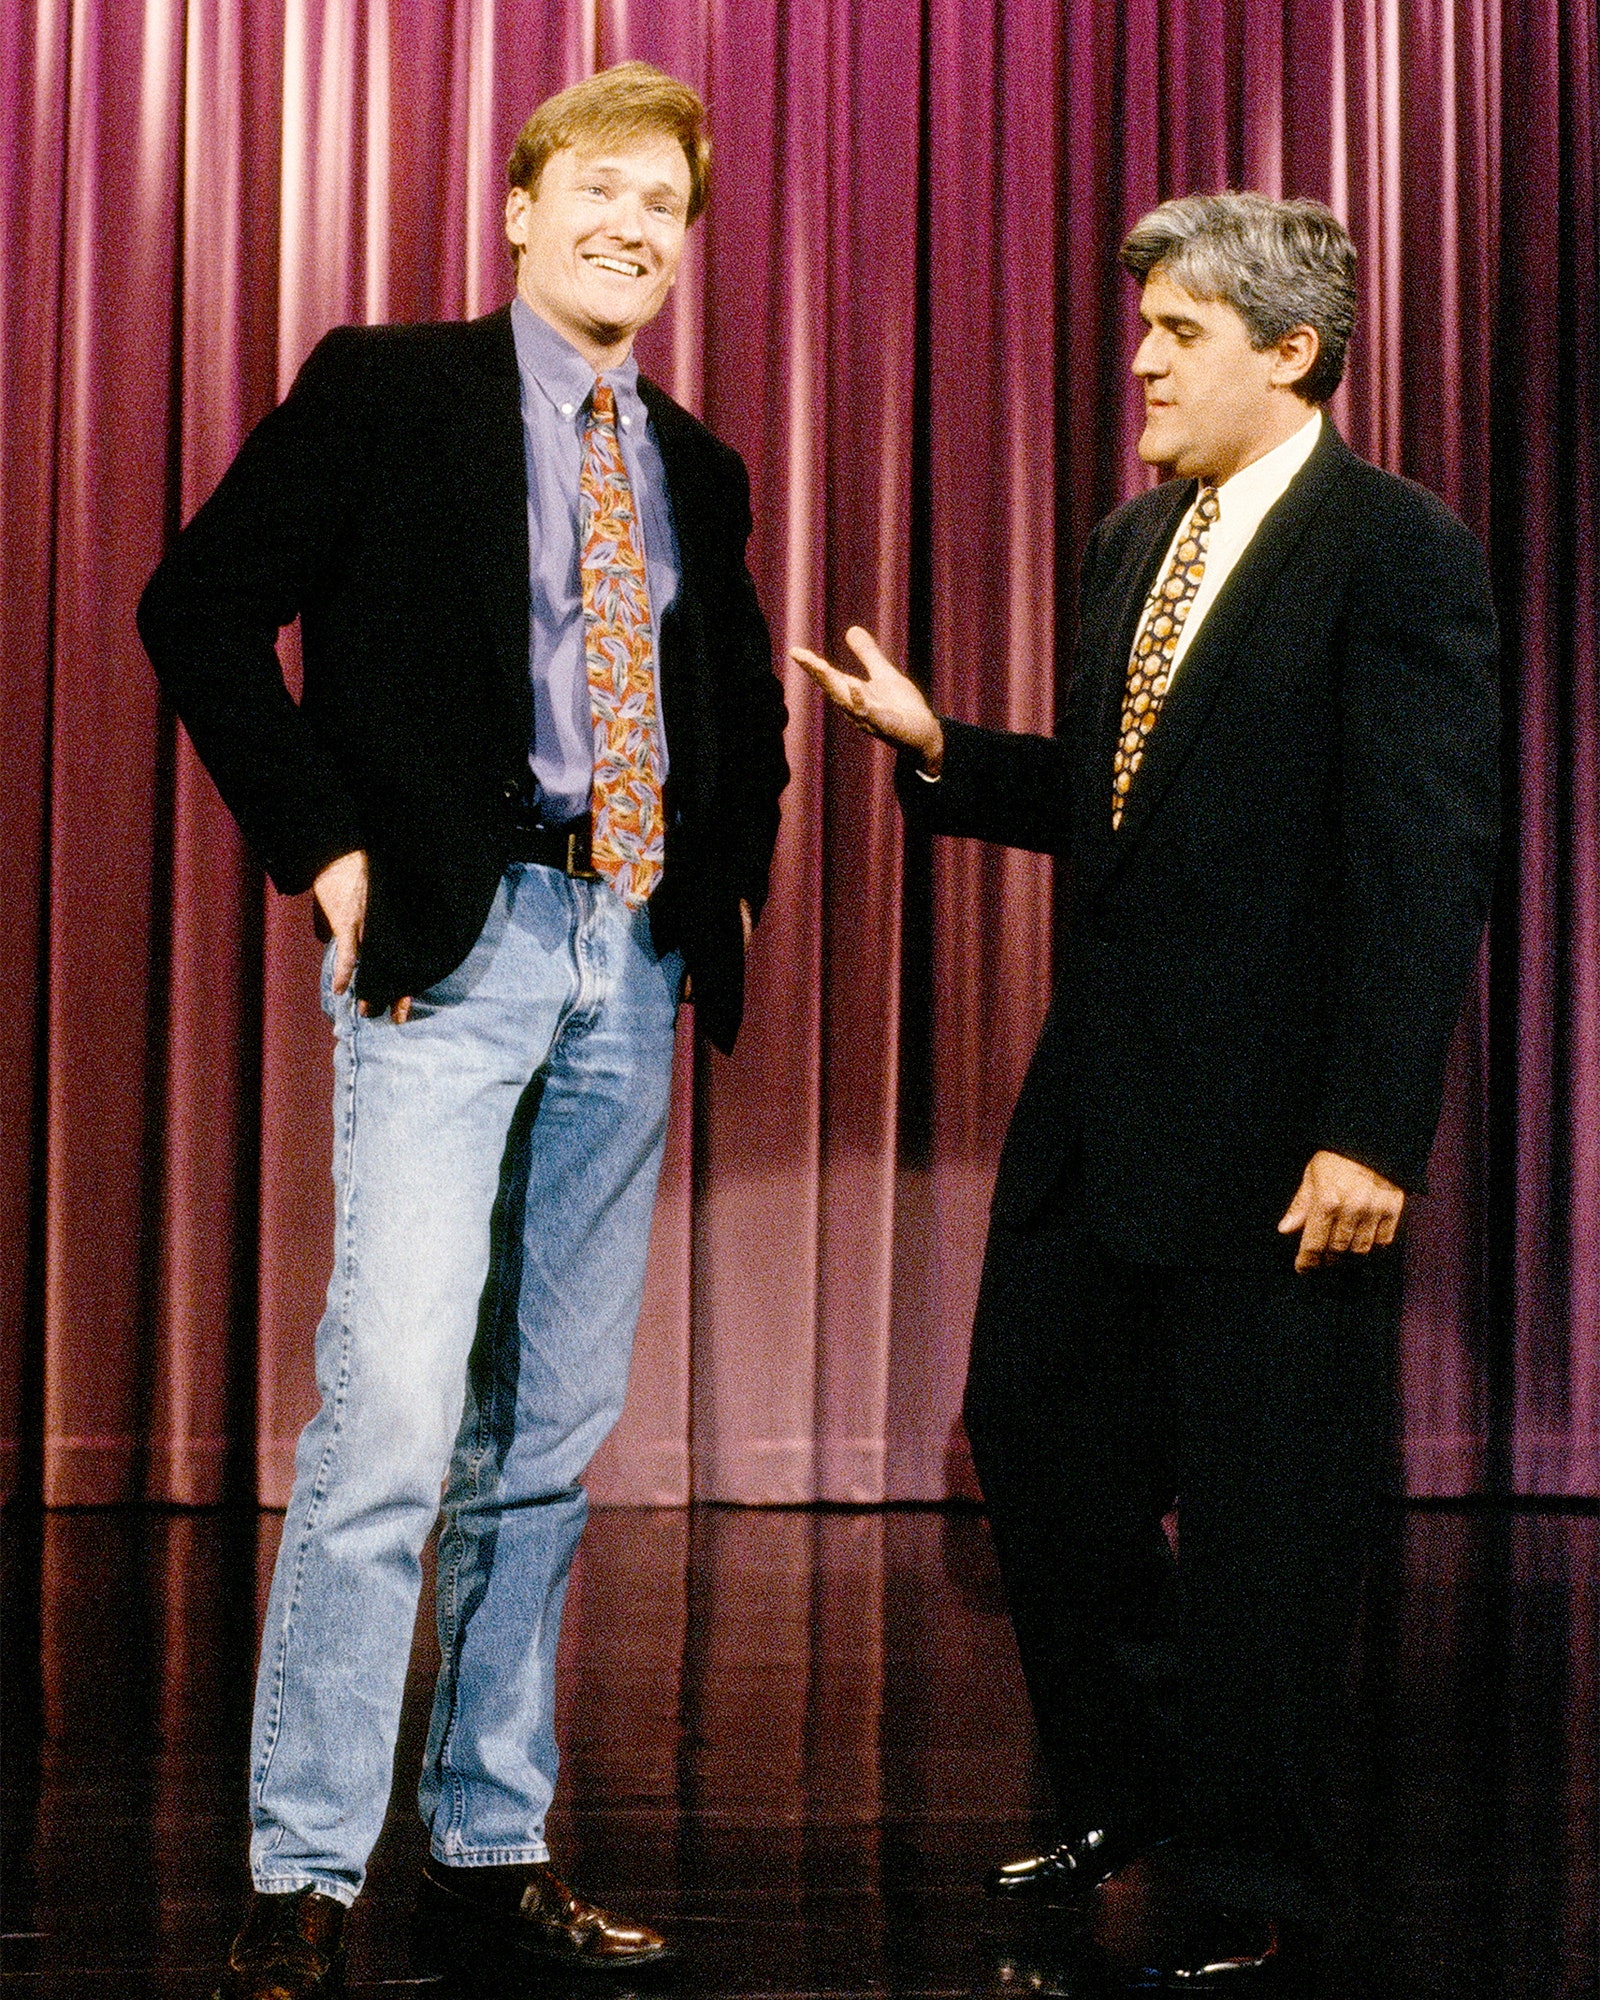 OBrien with Jay Leno.